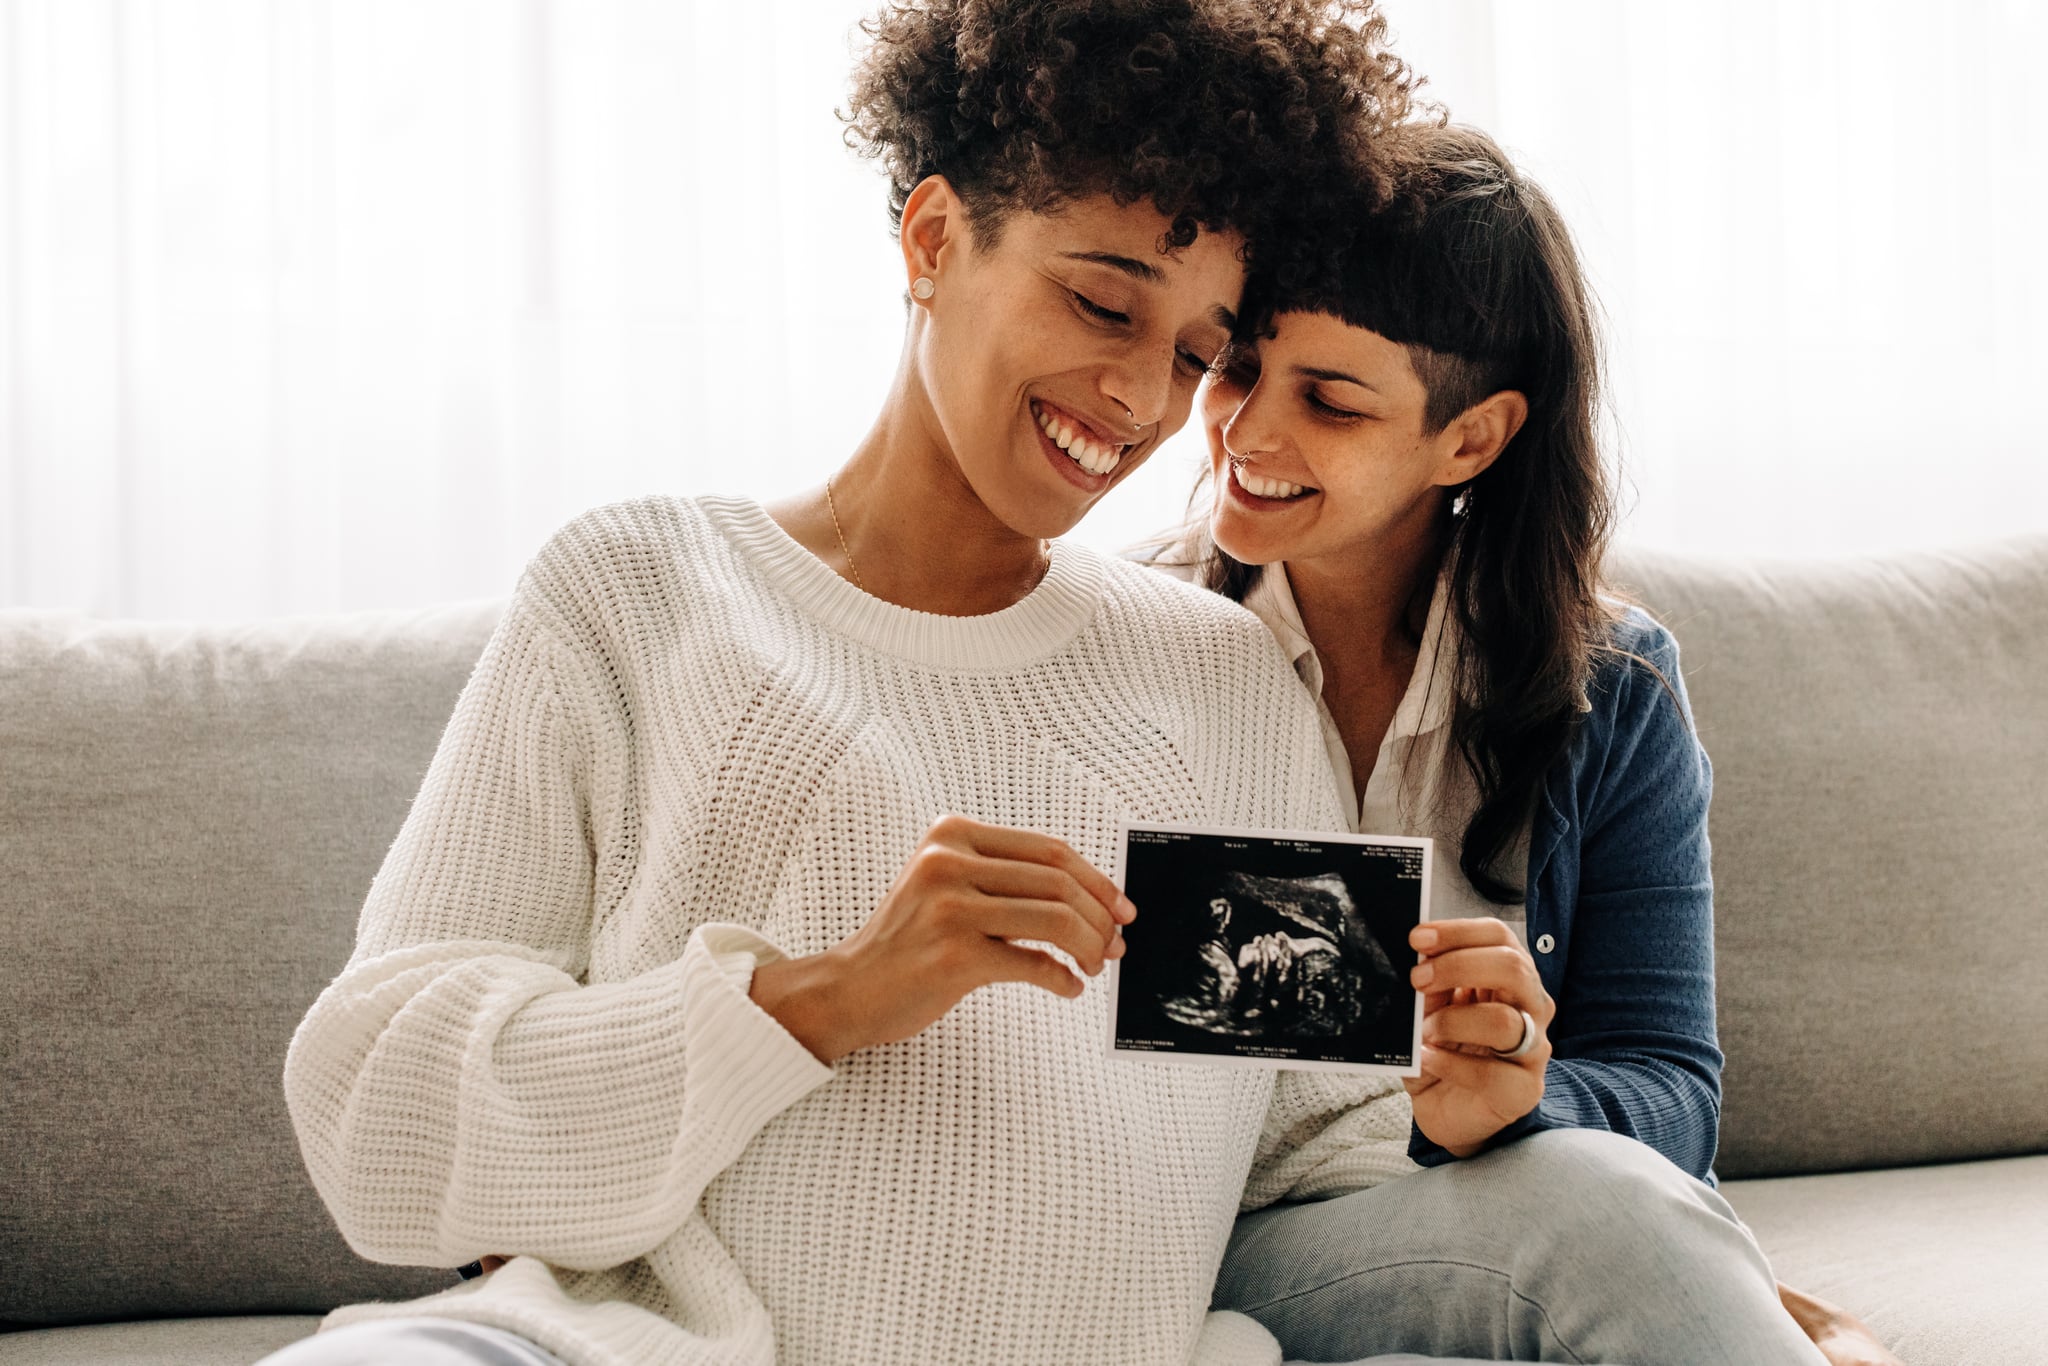 Same sex pregnant couple holding up their ultrasound scan.  Expectant lesbian couple smiling happily while holding an ultrasound scan of their unborn baby.  Young queer couple expecting a baby.